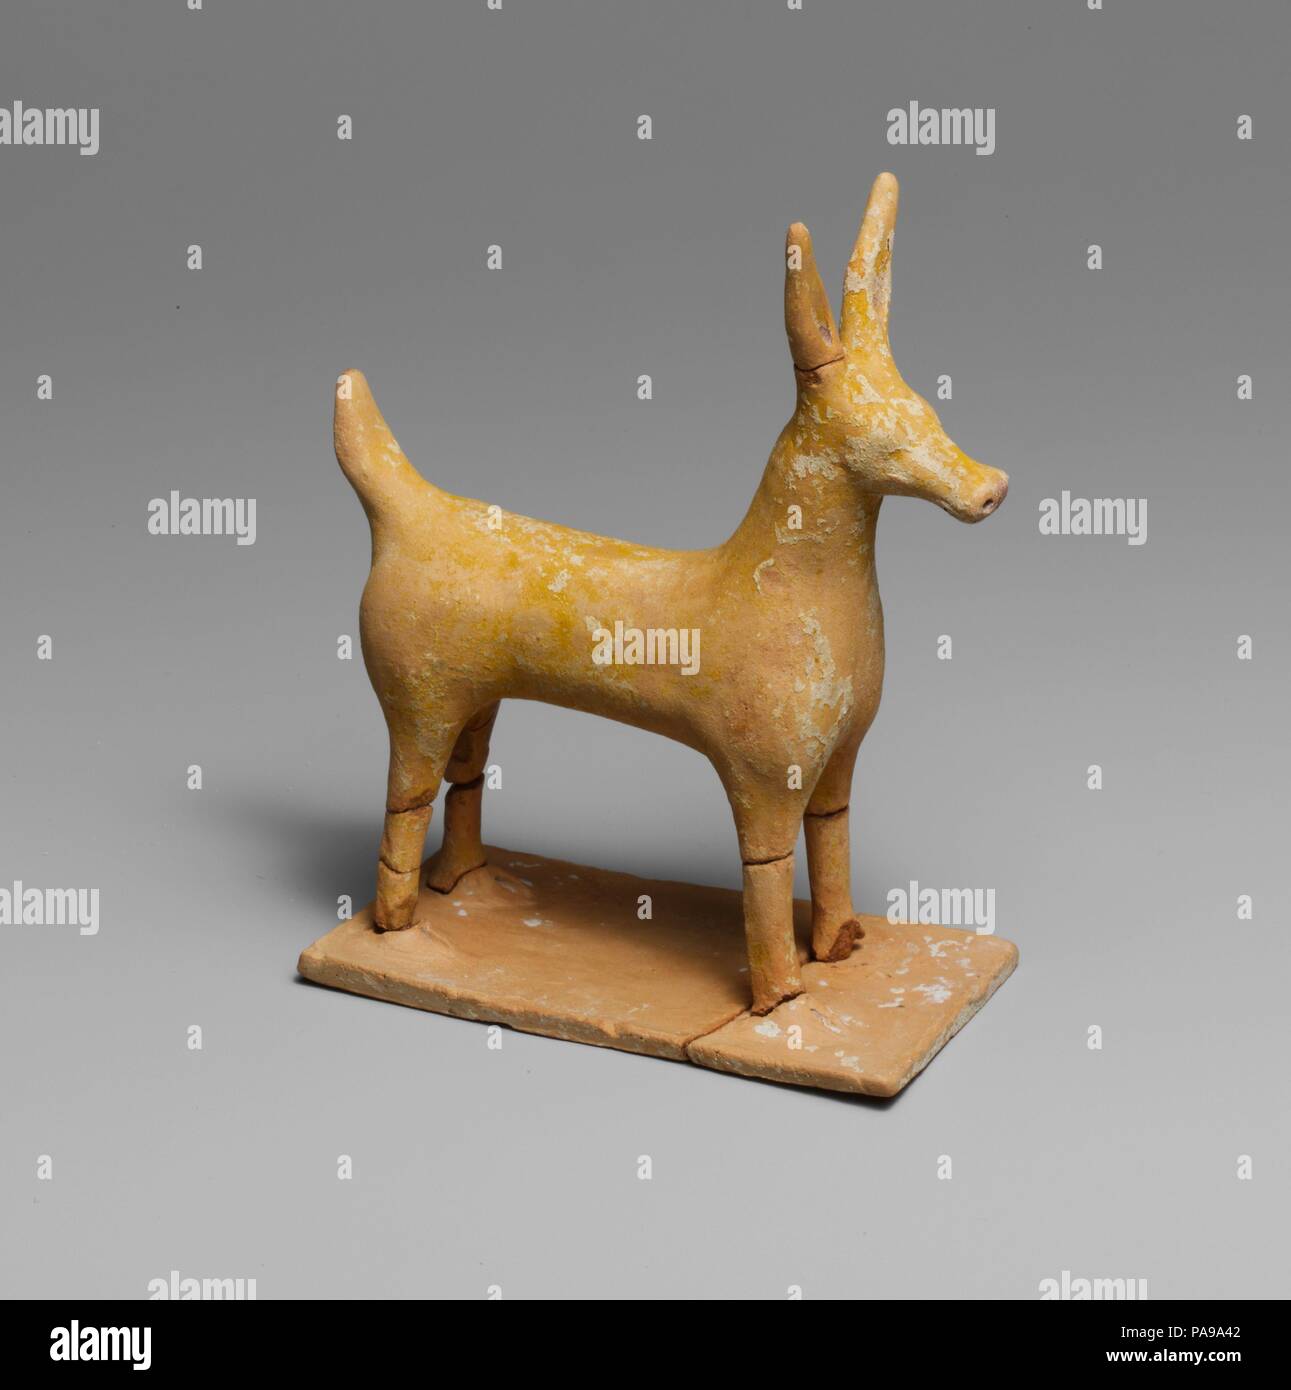 Terracotta statuette of a deer. Culture: Greek. Dimensions: H. 4 7/16 in. (11.3 cm)  Base 1 7/8 x 3 7/8 in. (4.8 x 8.8 cm). Date: late 6th century B.C..  Traces of paint can be seen on this statuette: yellow on the plinth and on the deer; red on all four feet, on the  nose, and inside the ears. Museum: Metropolitan Museum of Art, New York, USA. Stock Photo